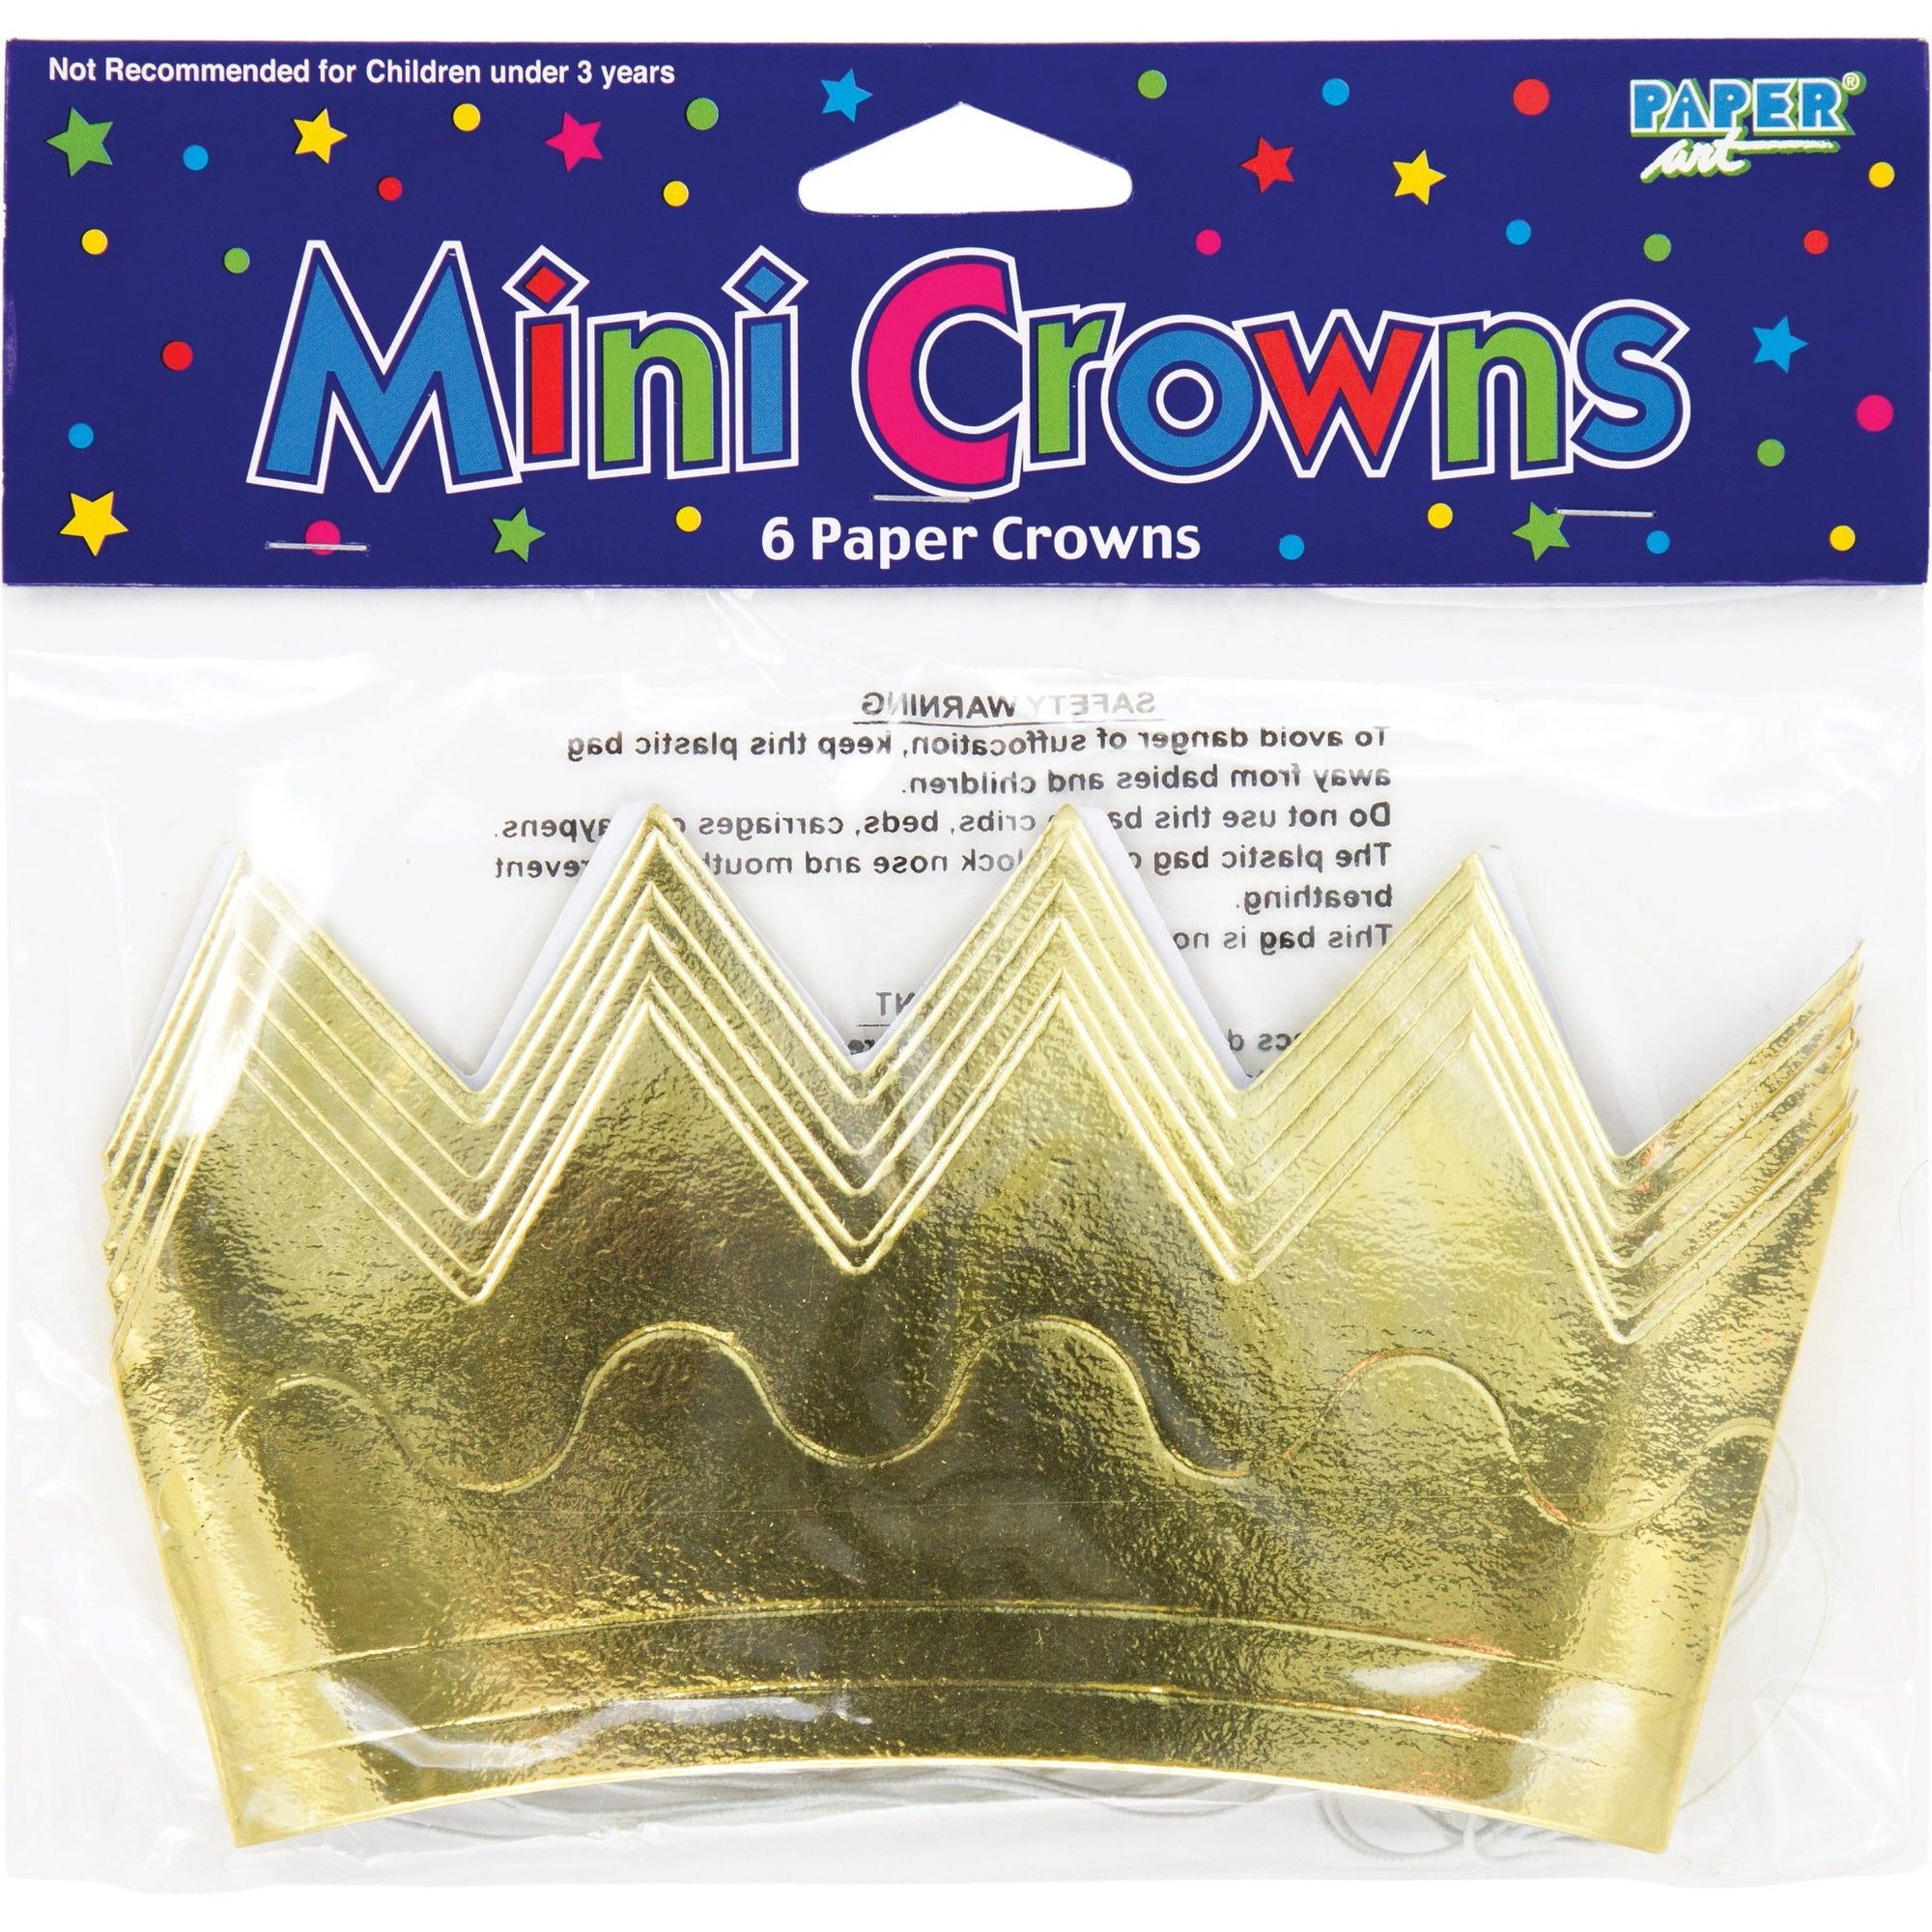 6 Crown Shaped Party Hats - Stesha Party